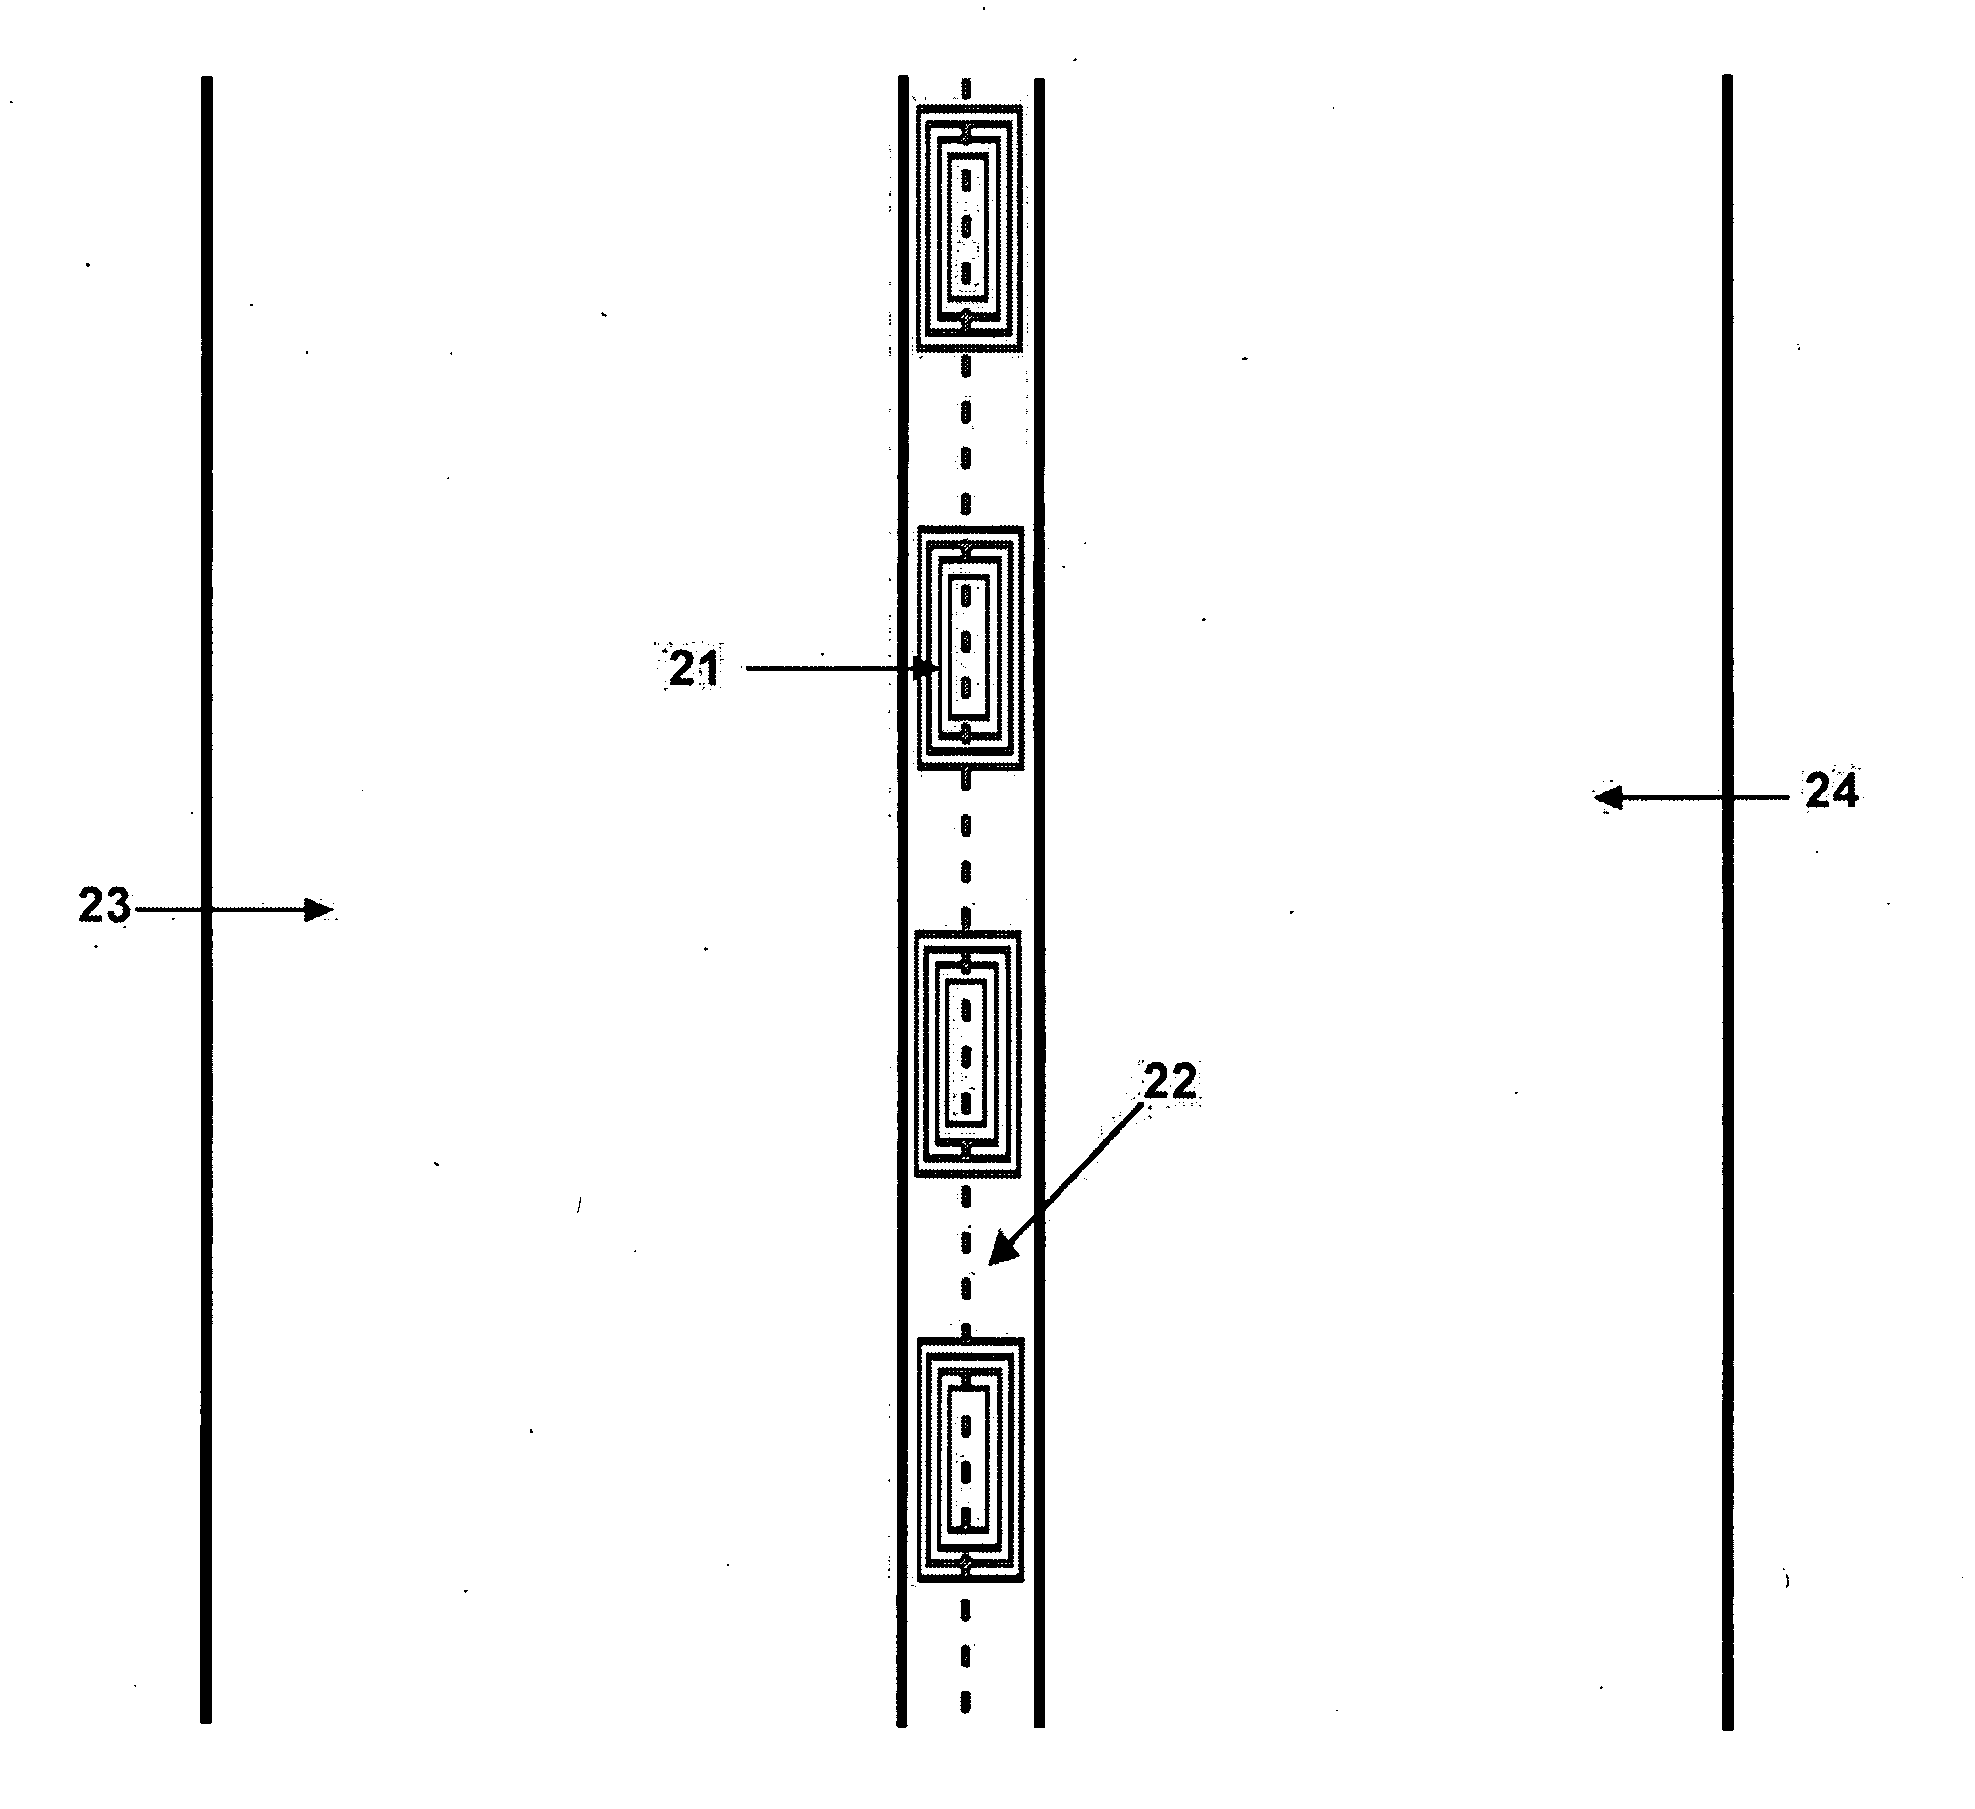 Tracking lane marker position through use of information-transmiting device